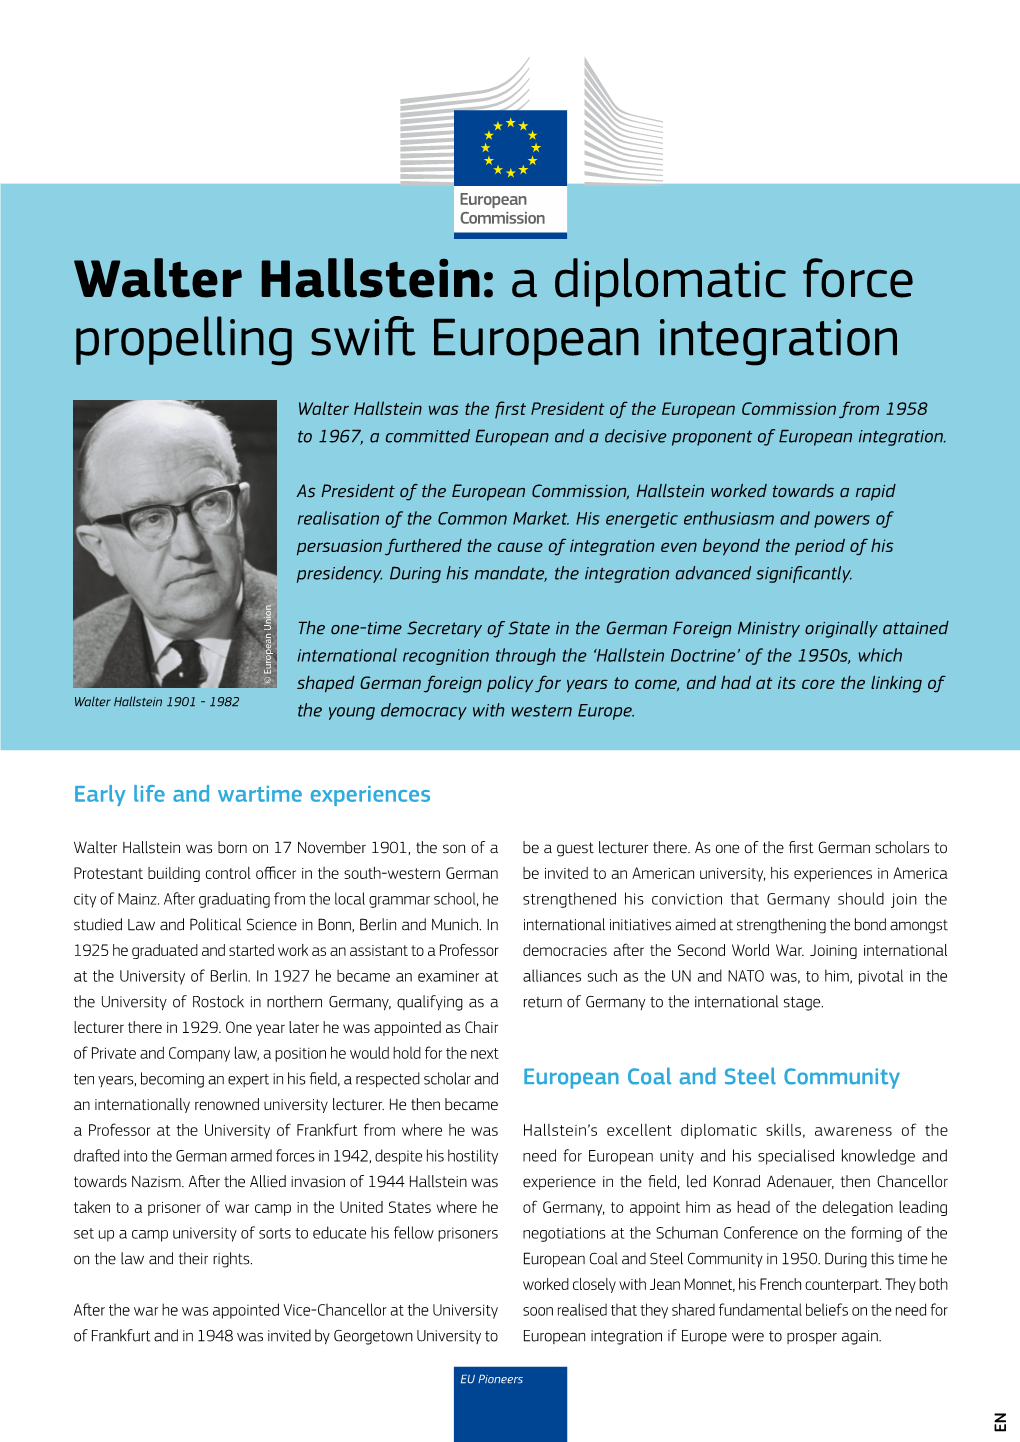 Walter Hallstein: a Diplomatic Force Propelling Swift European Integration